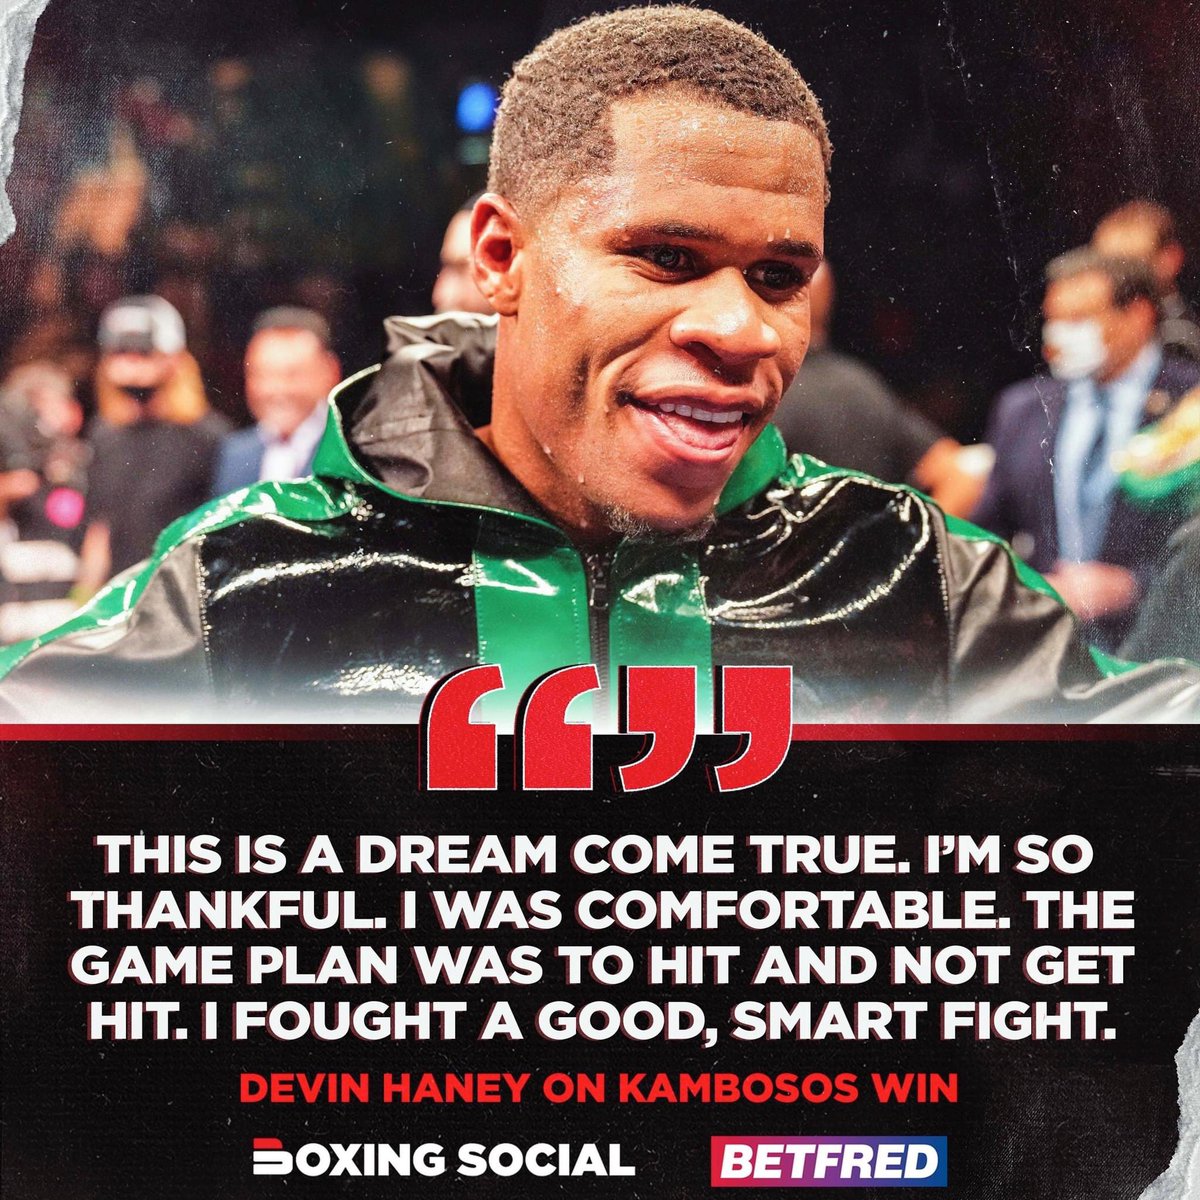 🤴🏿 New undisputed lightweight king Devin Haney reacts to his crowning night in Melbourne. 🇦🇺

#Boxing #KambososHaney